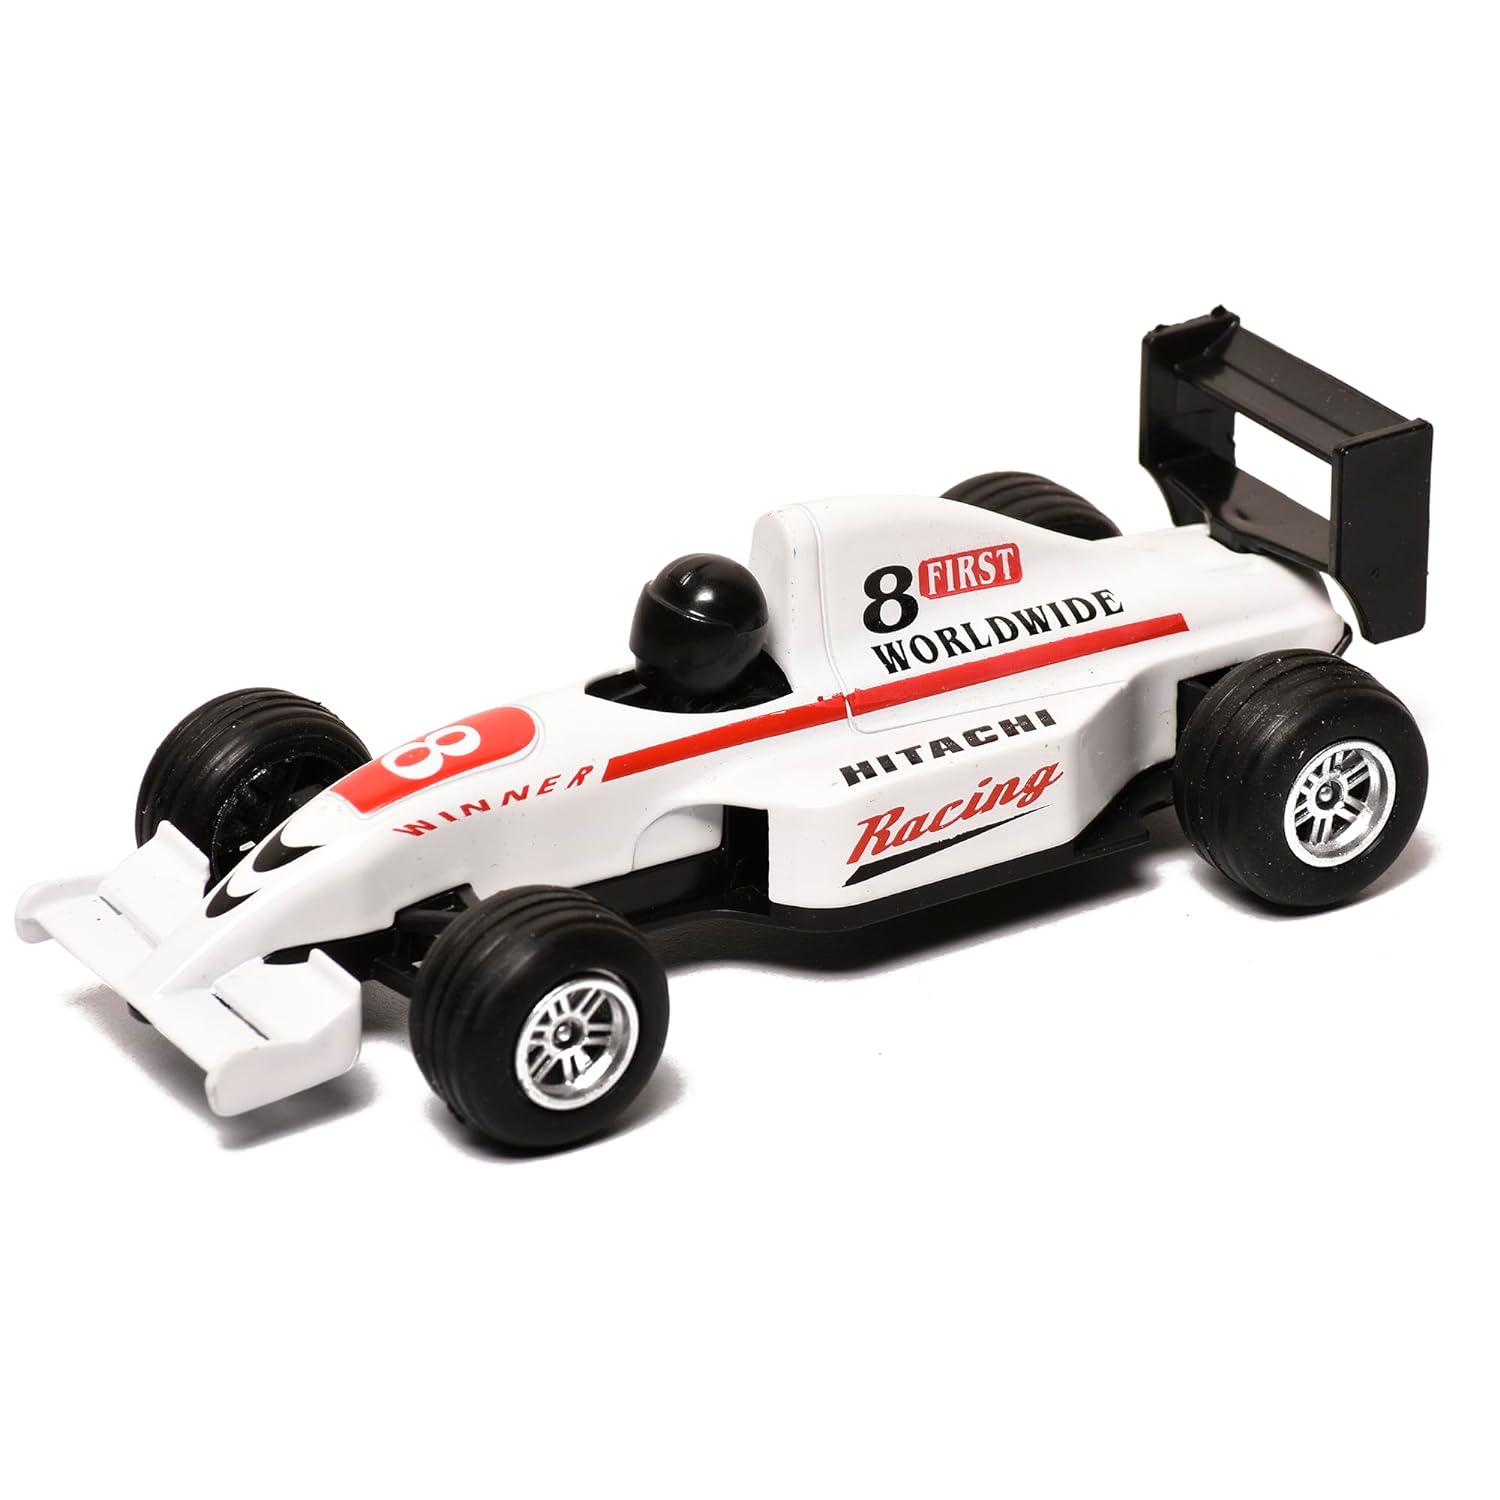 Braintastic Pullback Friction Simulation Model Small Size Racing Car Miniature Vehicle Toys for Kids Age 3 + (White)